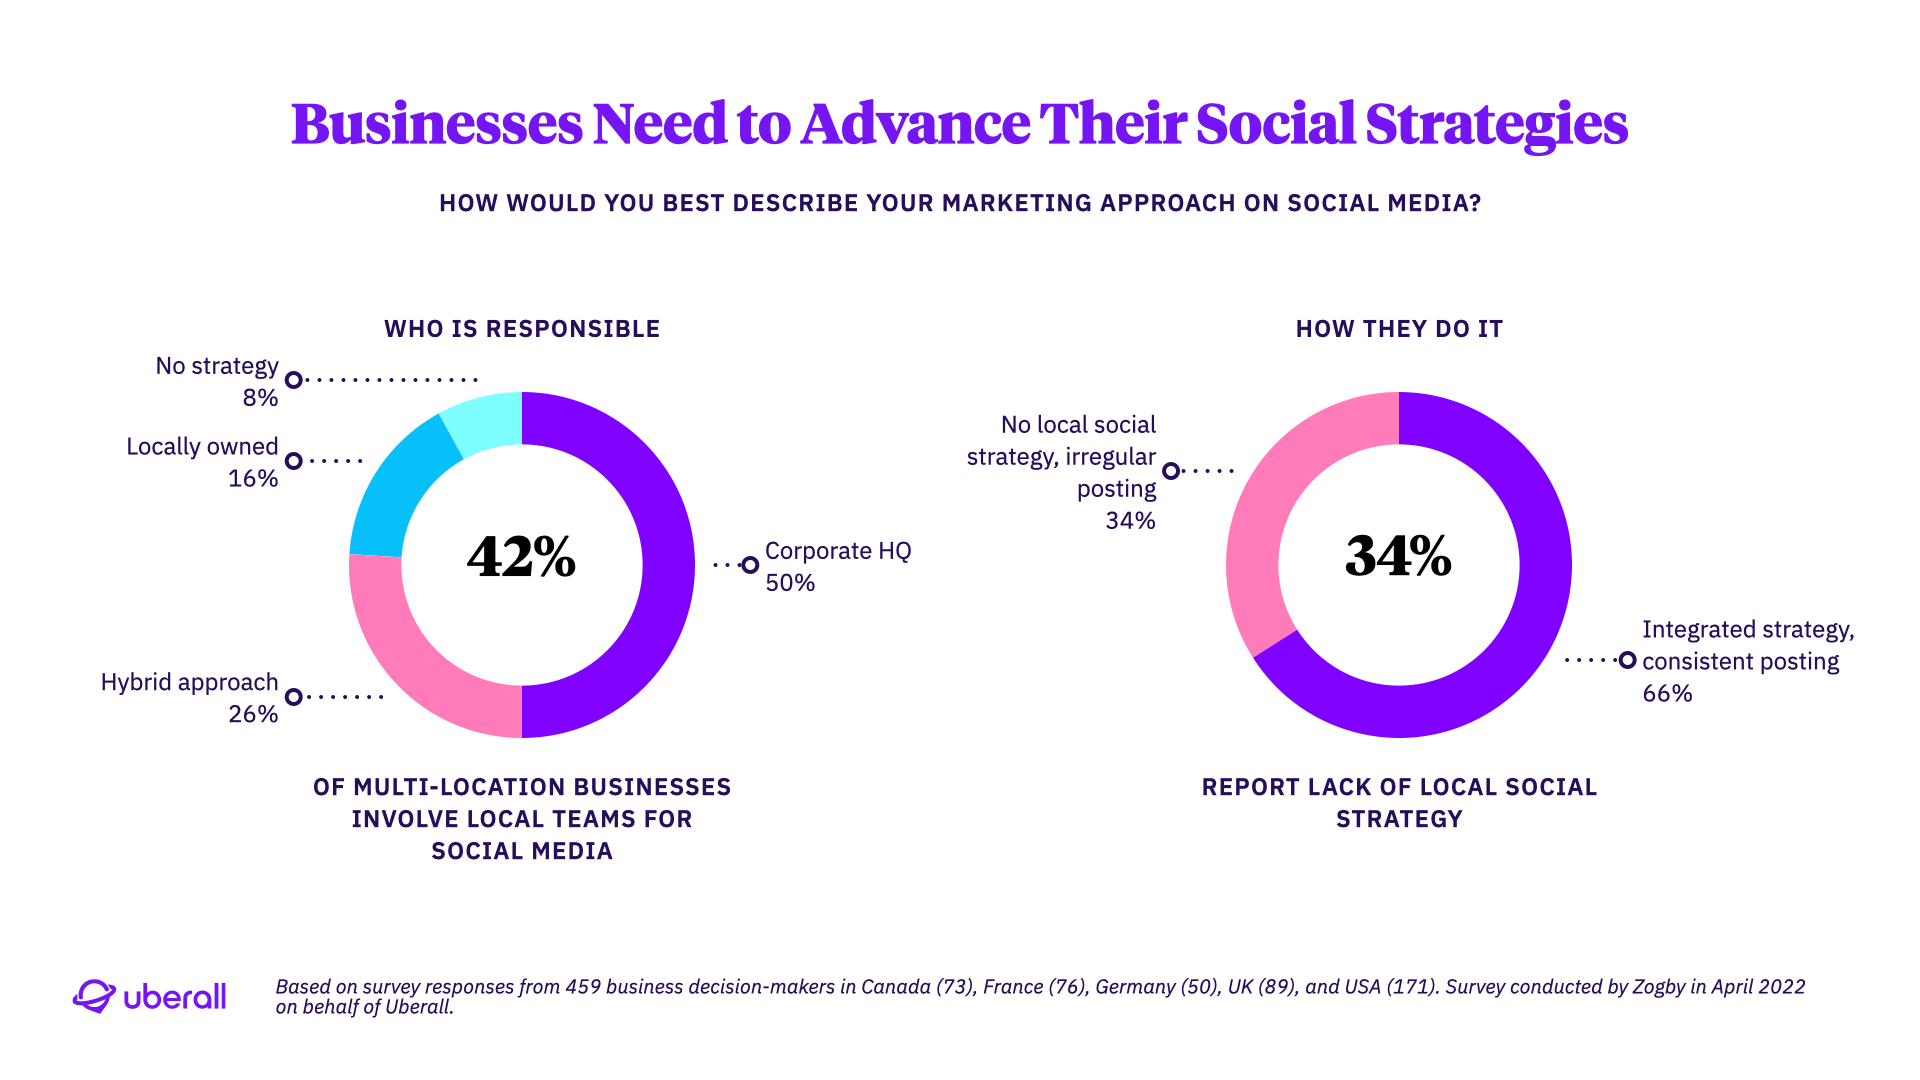 Businesses Need to Advance Their Social Strategies